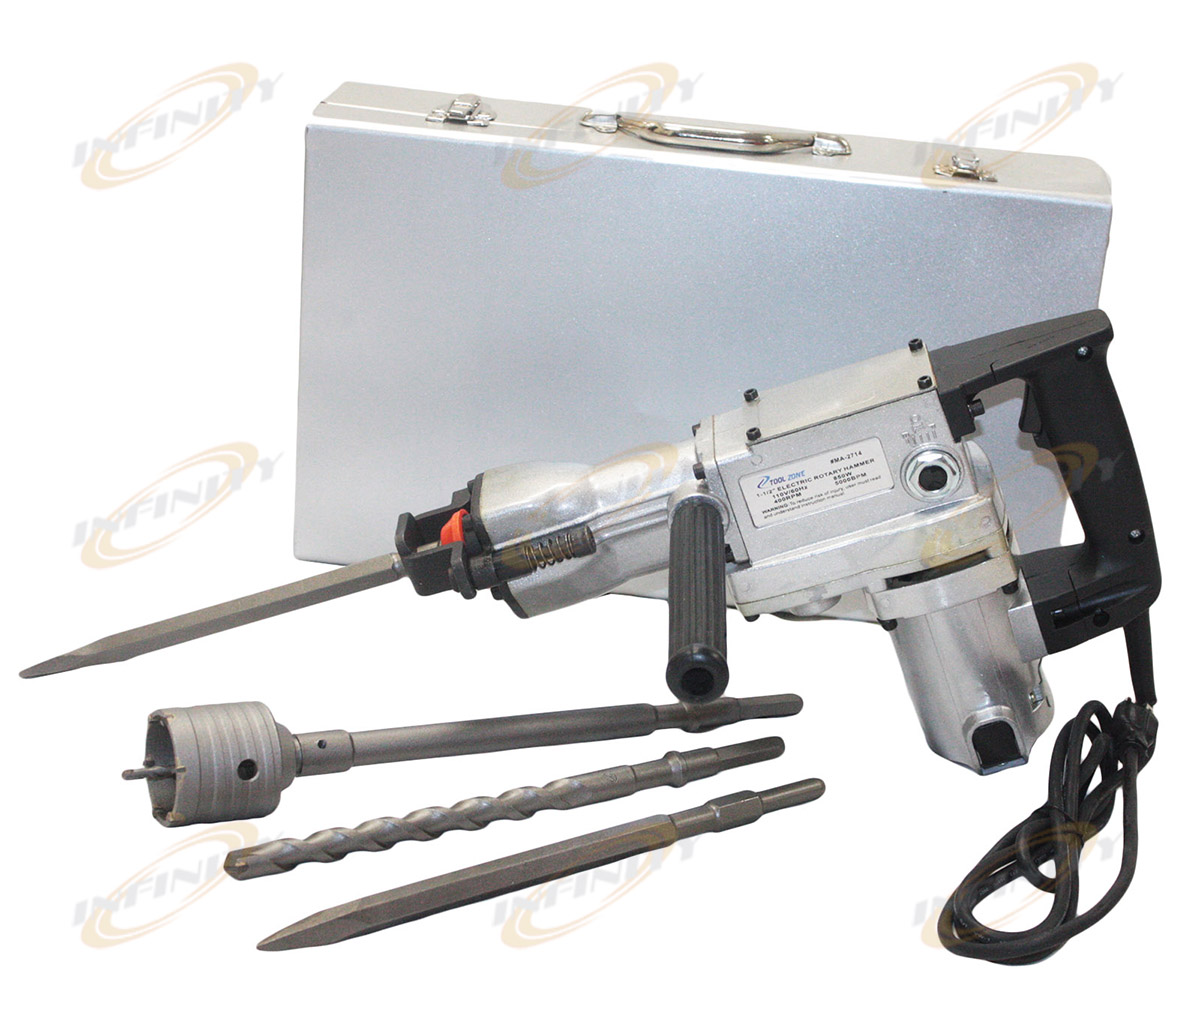 1800W Electric Rotary Hammer Drill & Demolition Mode 500BMP w/ Core Bit Hole Saw 